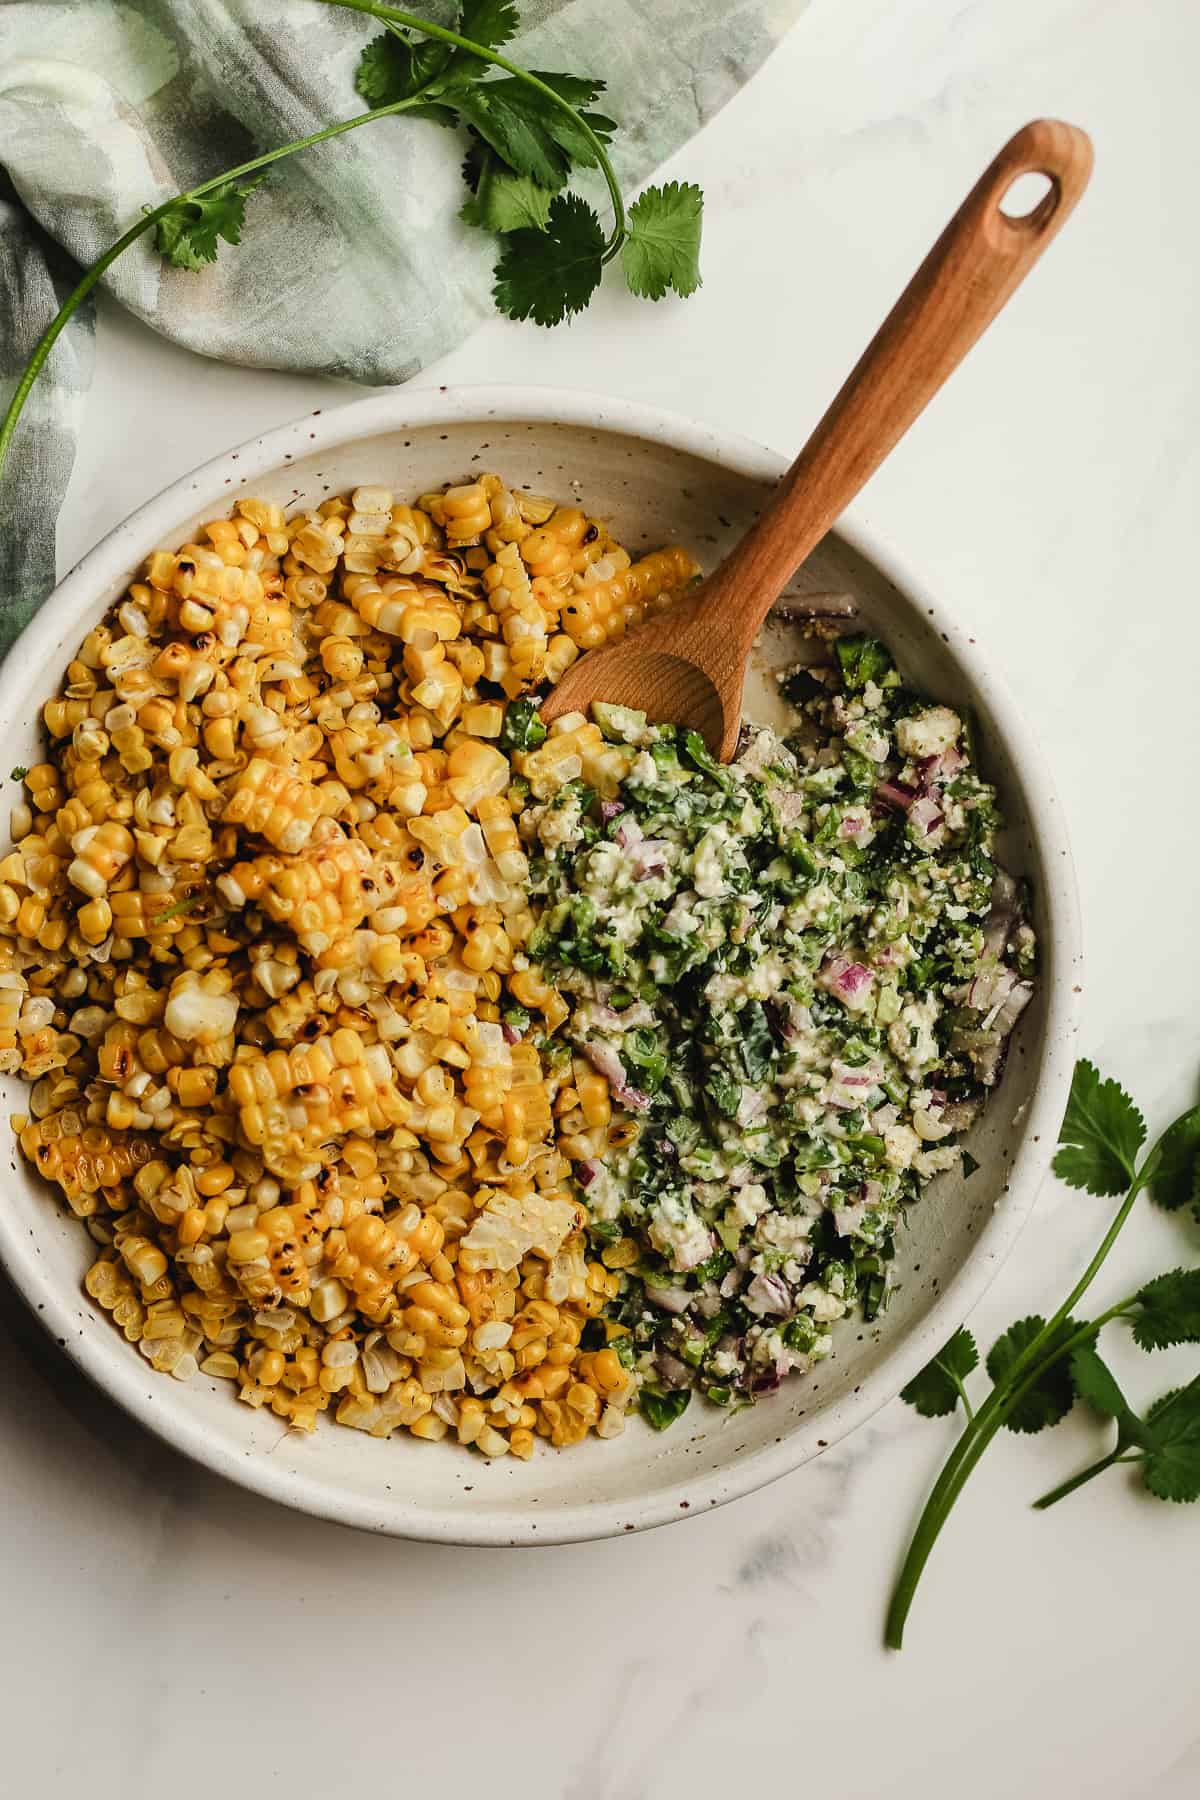 A bowl of the grilled corn and the salad ingredients.